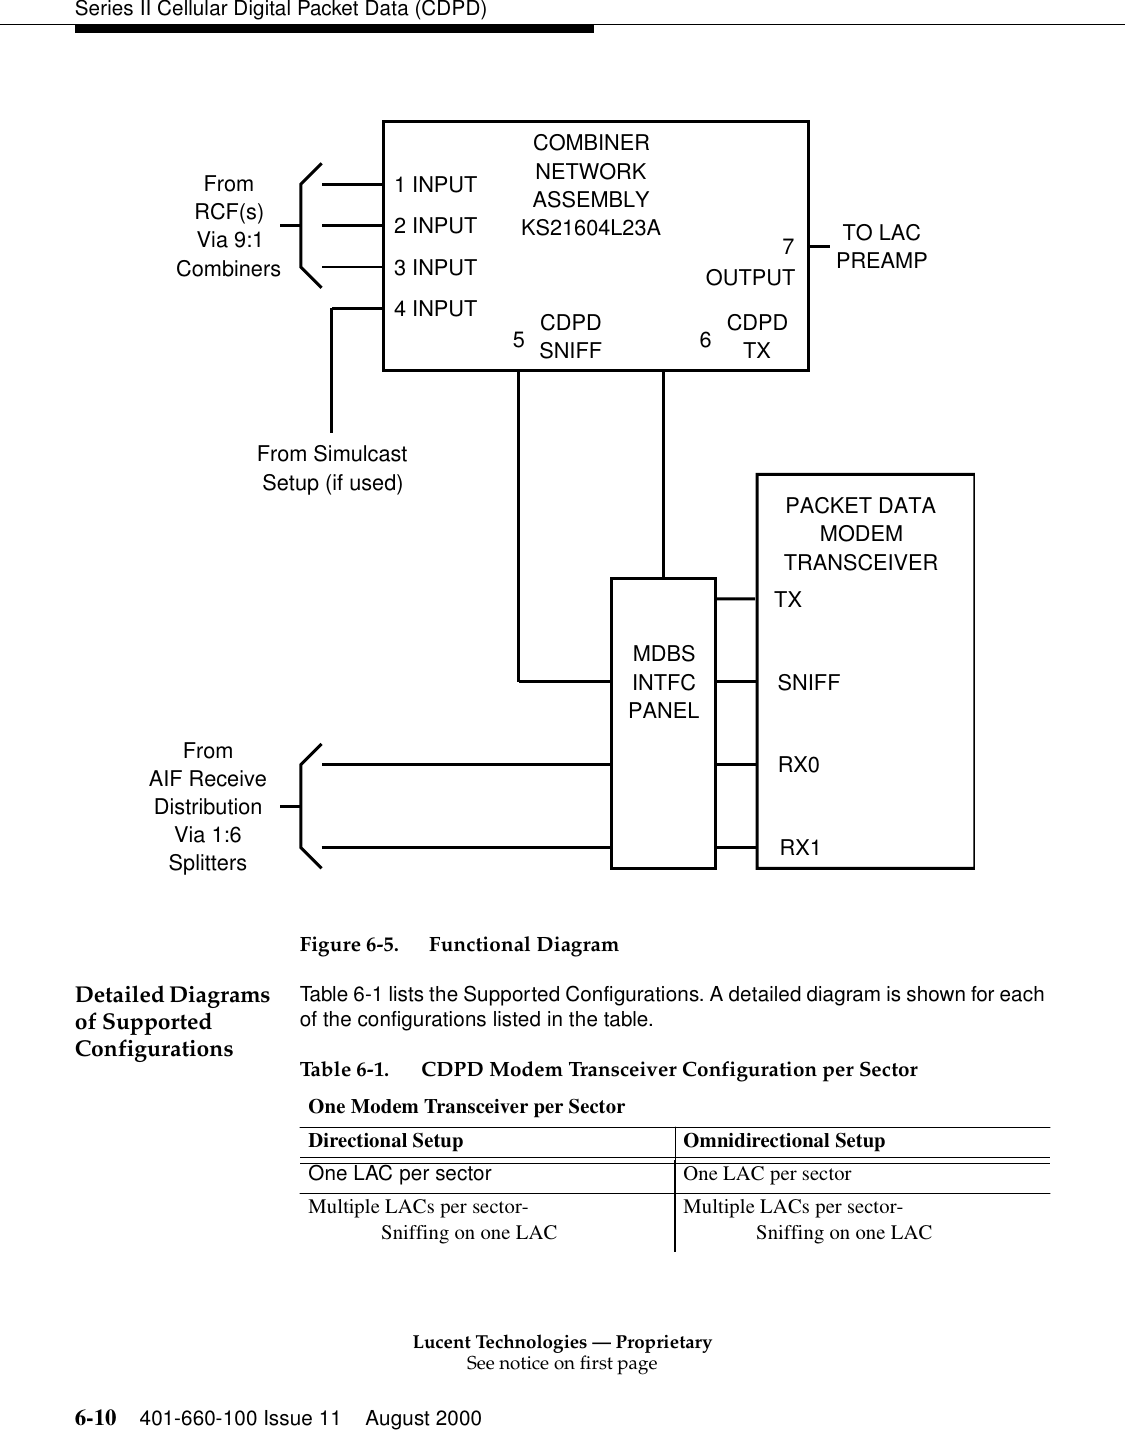 Lucent Technologies — ProprietarySee notice on first page6-10 401-660-100 Issue 11 August 2000Series II Cellular Digital Packet Data (CDPD)Figure 6-5. Functional DiagramDetailed Diagrams of Supported ConfigurationsTable 6-1 lists the Supported Configurations. A detailed diagram is shown for each of the configurations listed in the table.  TO LACPREAMPTXRX0RX1SNIFFPACKET DATAMODEMTRANSCEIVERMDBSINTFCPANELCOMBINERNETWORKASSEMBLYKS21604L23A1 INPUT2 INPUT3 INPUT4 INPUT56CDPDSNIFFCDPDTXFromRCF(s)Via 9:1CombinersFrom SimulcastSetup (if used)FromAIF ReceiveDistributionVia 1:6Splitters7OUTPUTTable 6-1. CDPD Modem Transceiver Configuration per Sector One Modem Transceiver per Sector Directional Setup  Omnidirectional Setup One LAC per sector  One LAC per sectorMultiple LACs per sector-              Sniffing on one LACMultiple LACs per sector-              Sniffing on one LAC